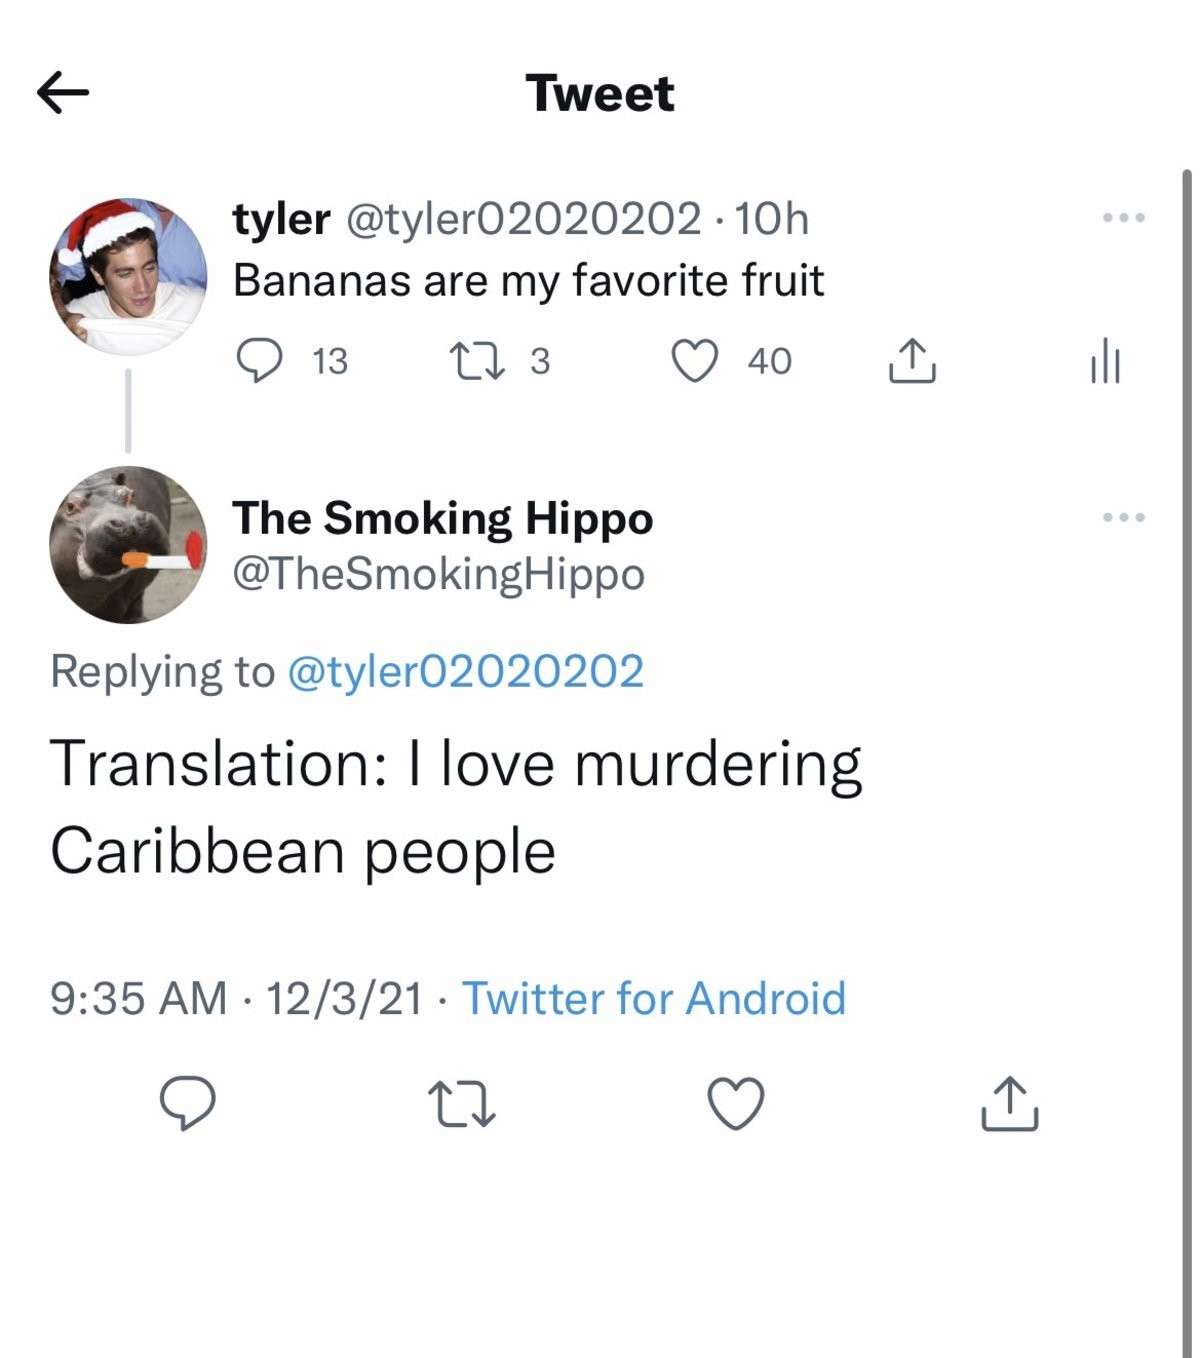 6 ft 7ft 8ft 9. yeah the banana market is cutthroat and cruel, but most of our bannas come from South of Mexico... God above, I hate people like this let people enjoy things